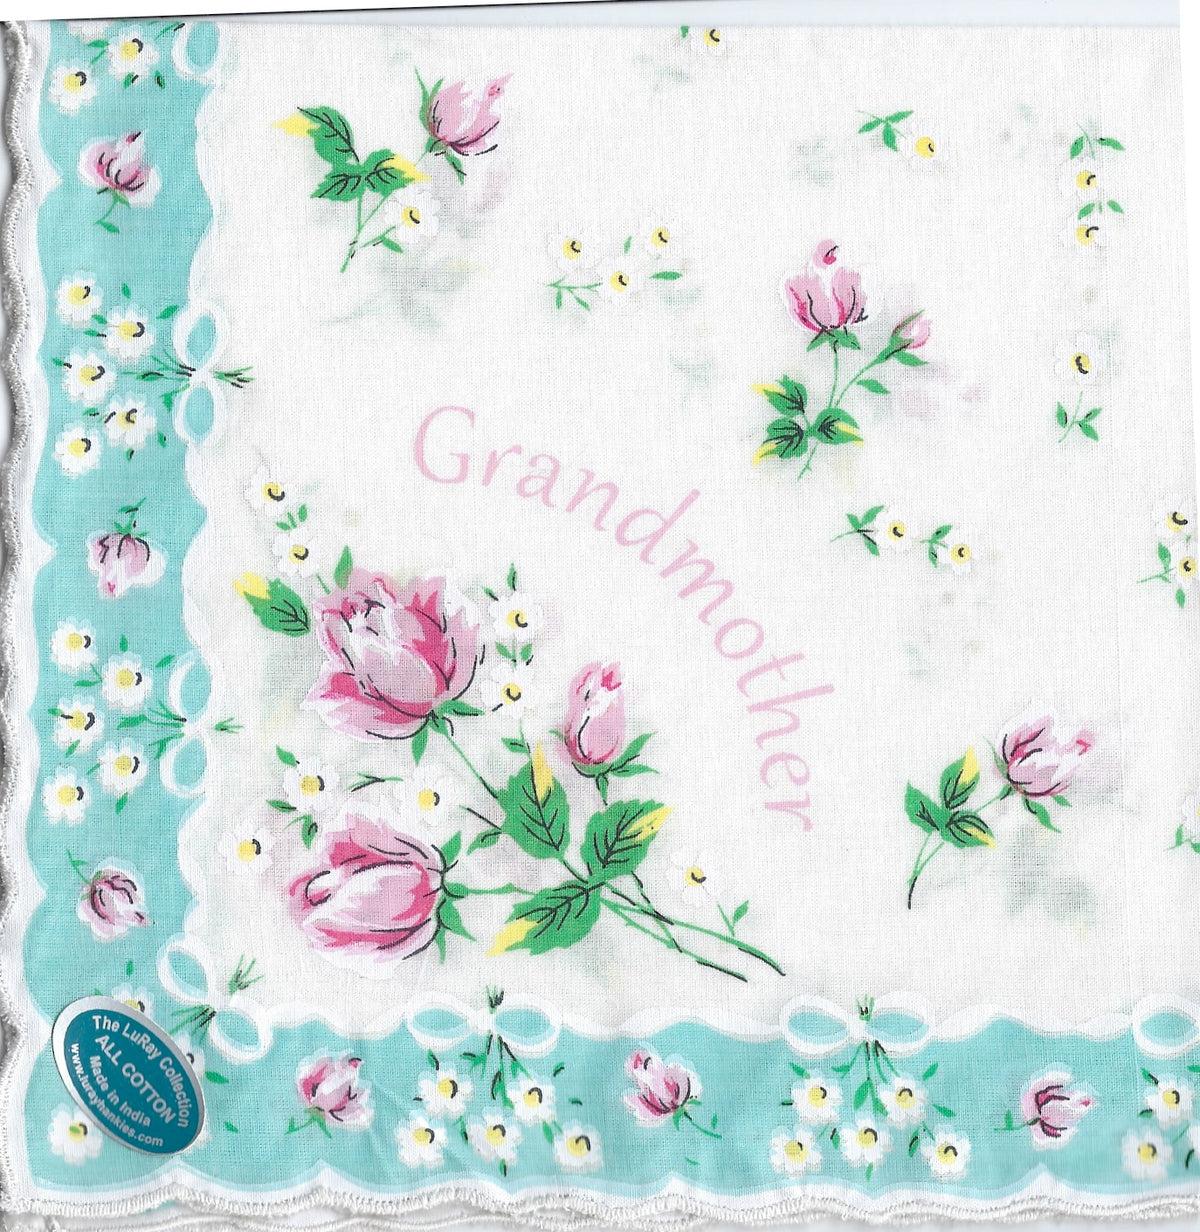 A square Grandmother Hanky crafted from 100% pure cotton, featuring scalloped edges and decorated with pink flowers and the word "grandmother" in the center. A tag indicates "the Leonardo from Hankies ala Carte".